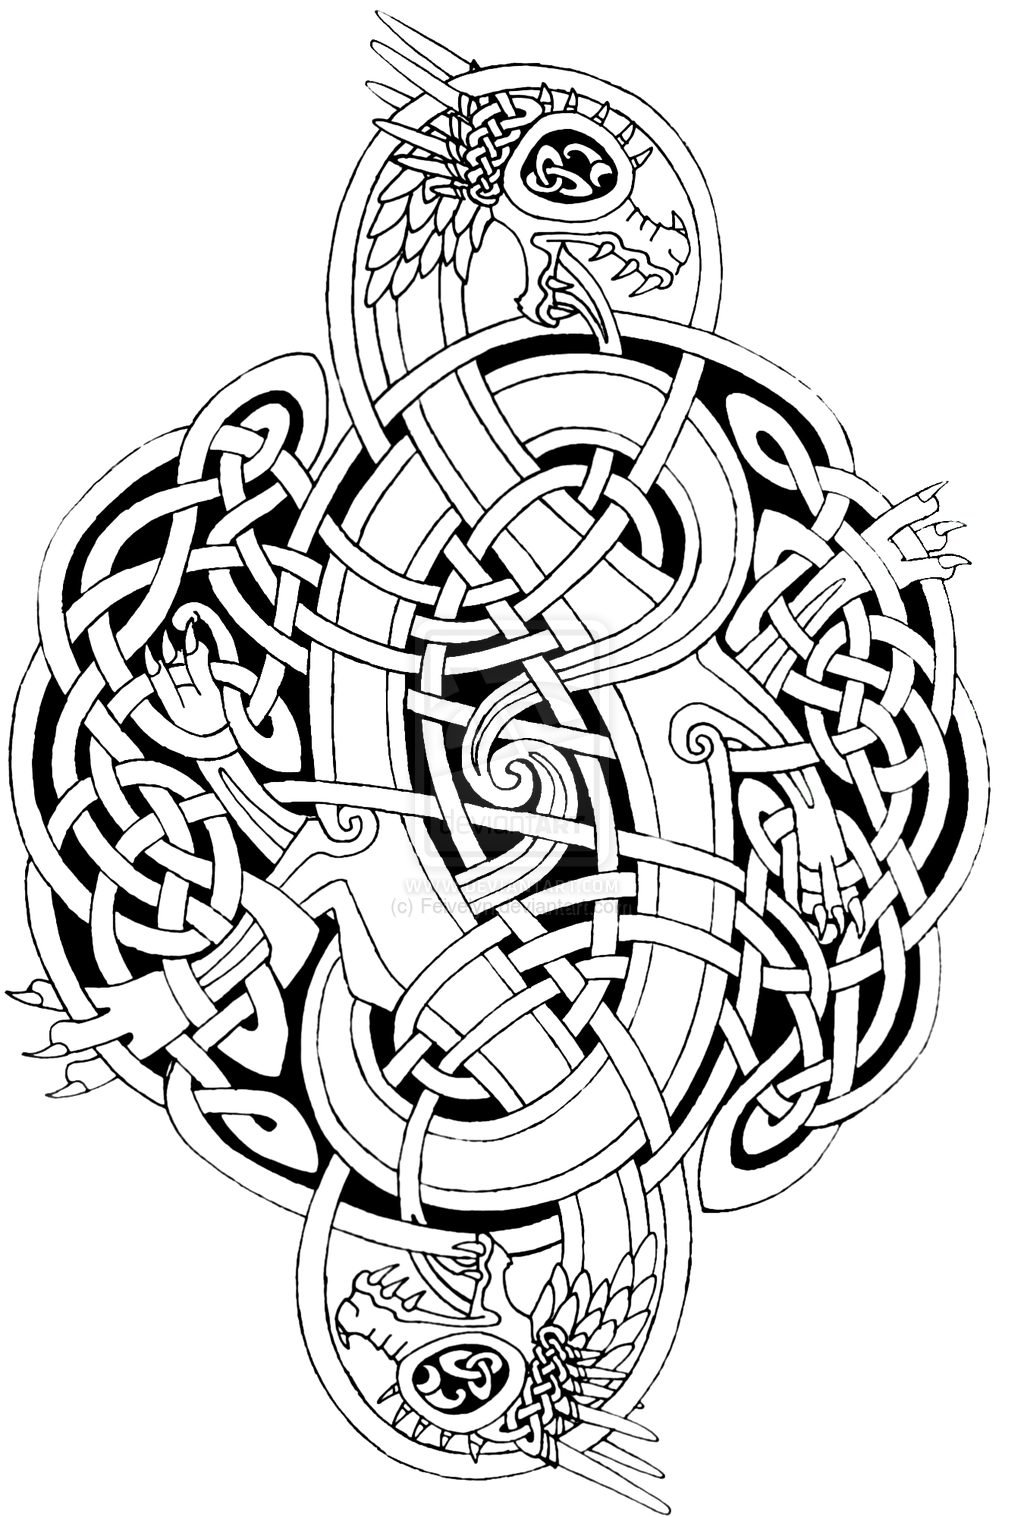 Printable Celtic Coloring Pages Adults Coloring Pages